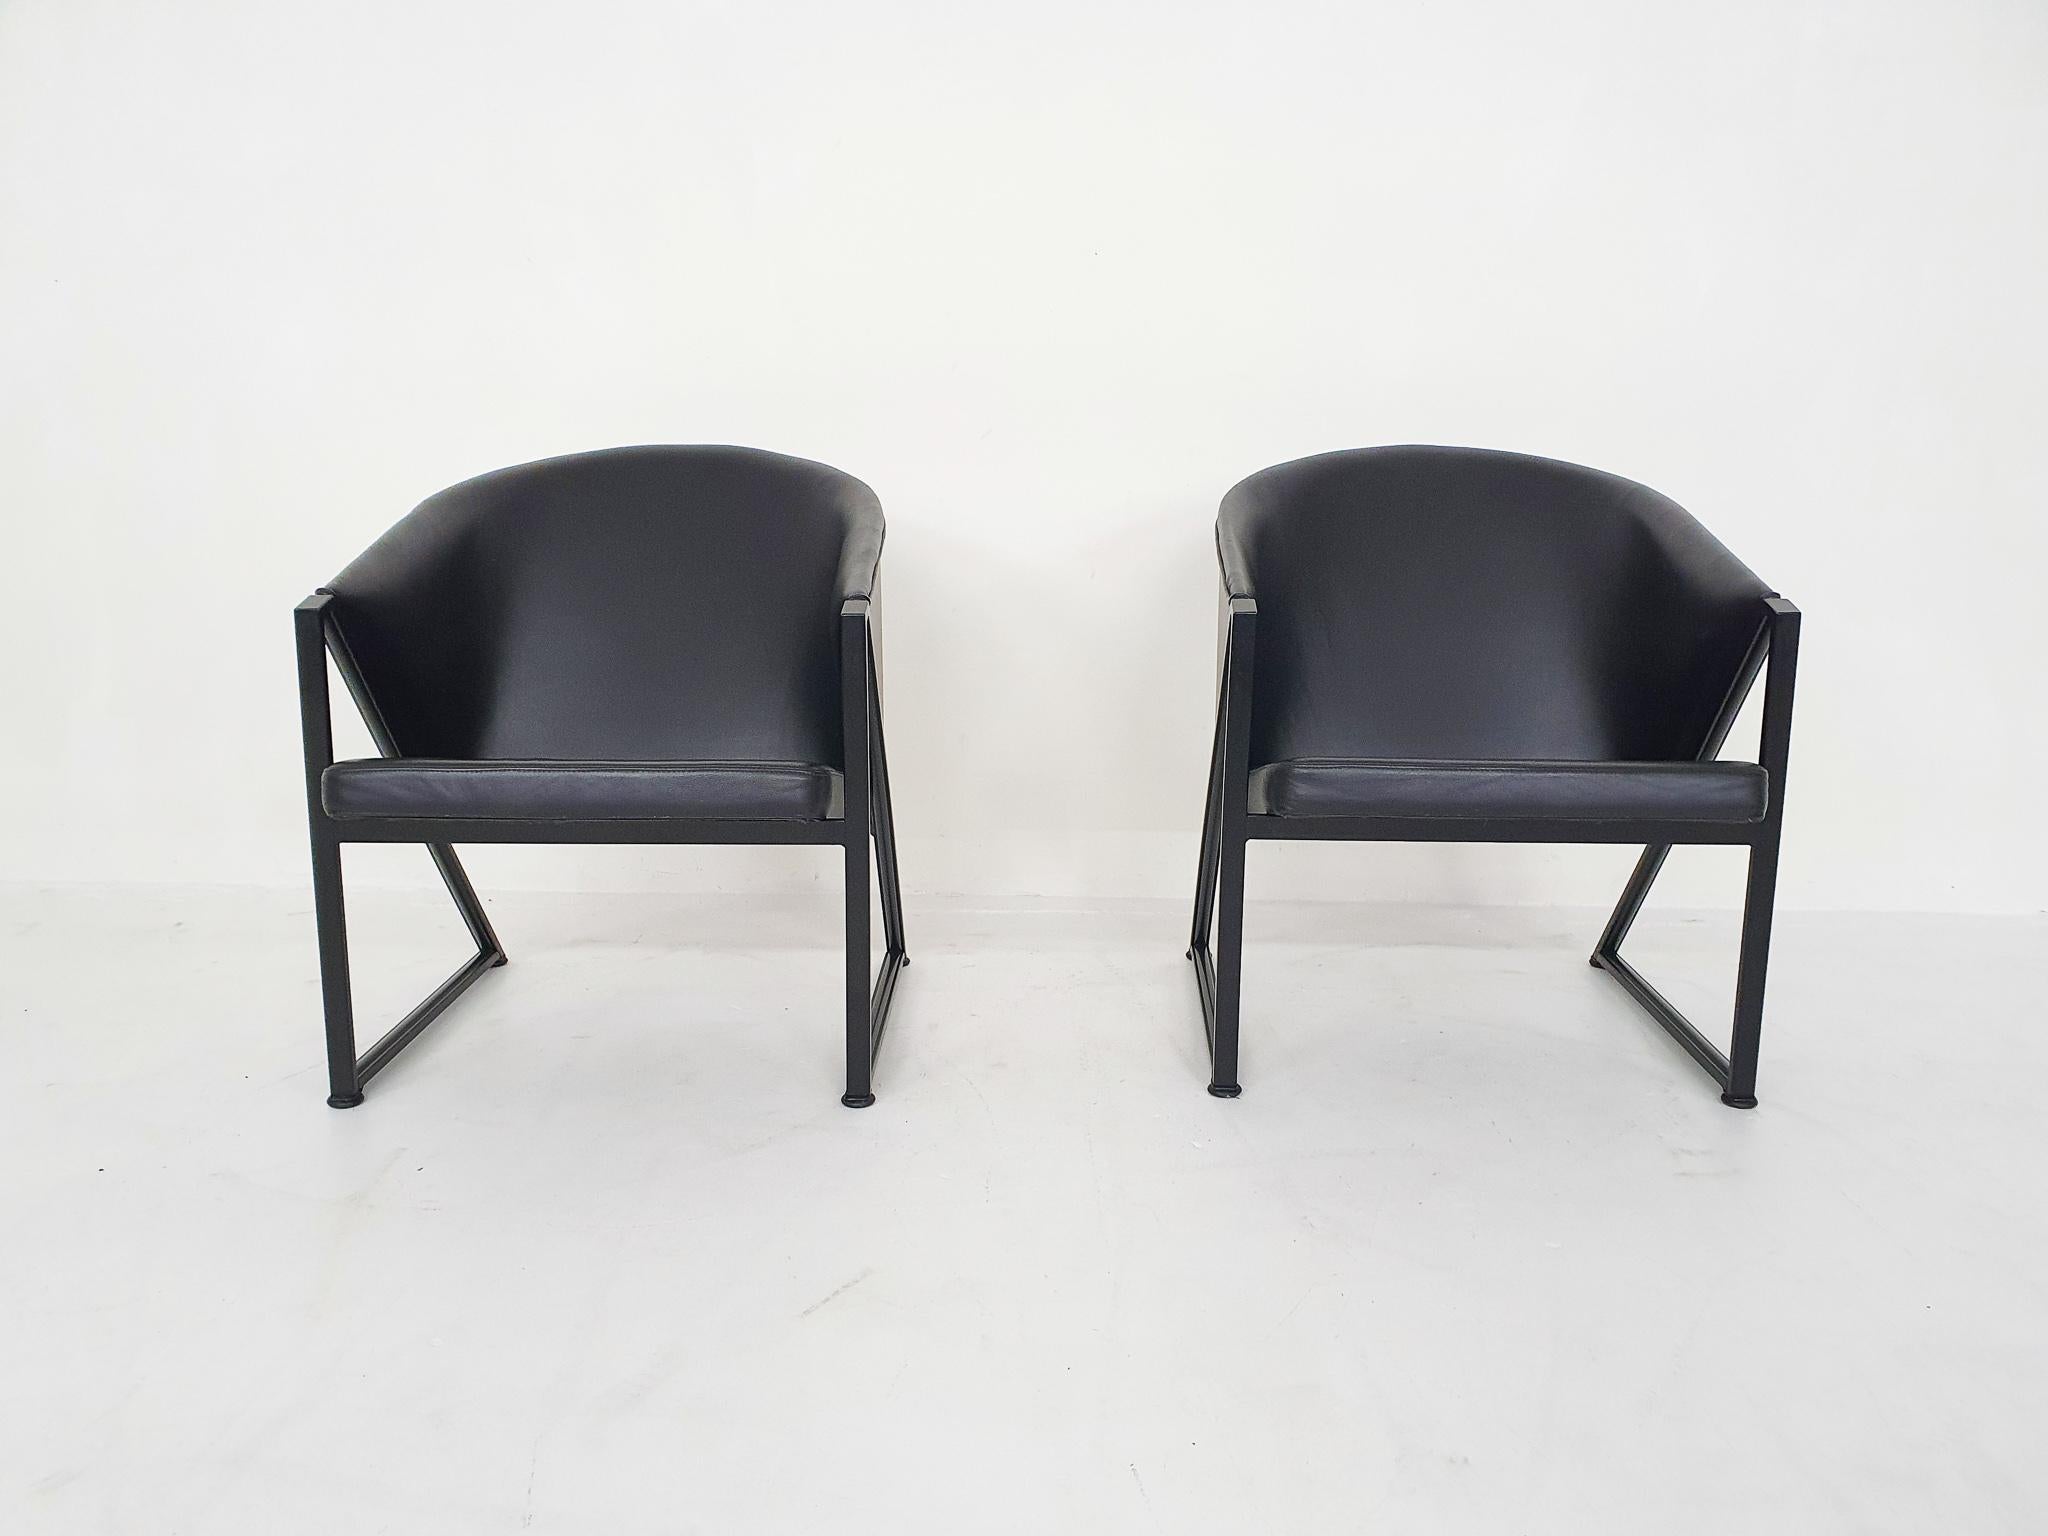 Black metal frame and black leather upholstery. In good original condition.